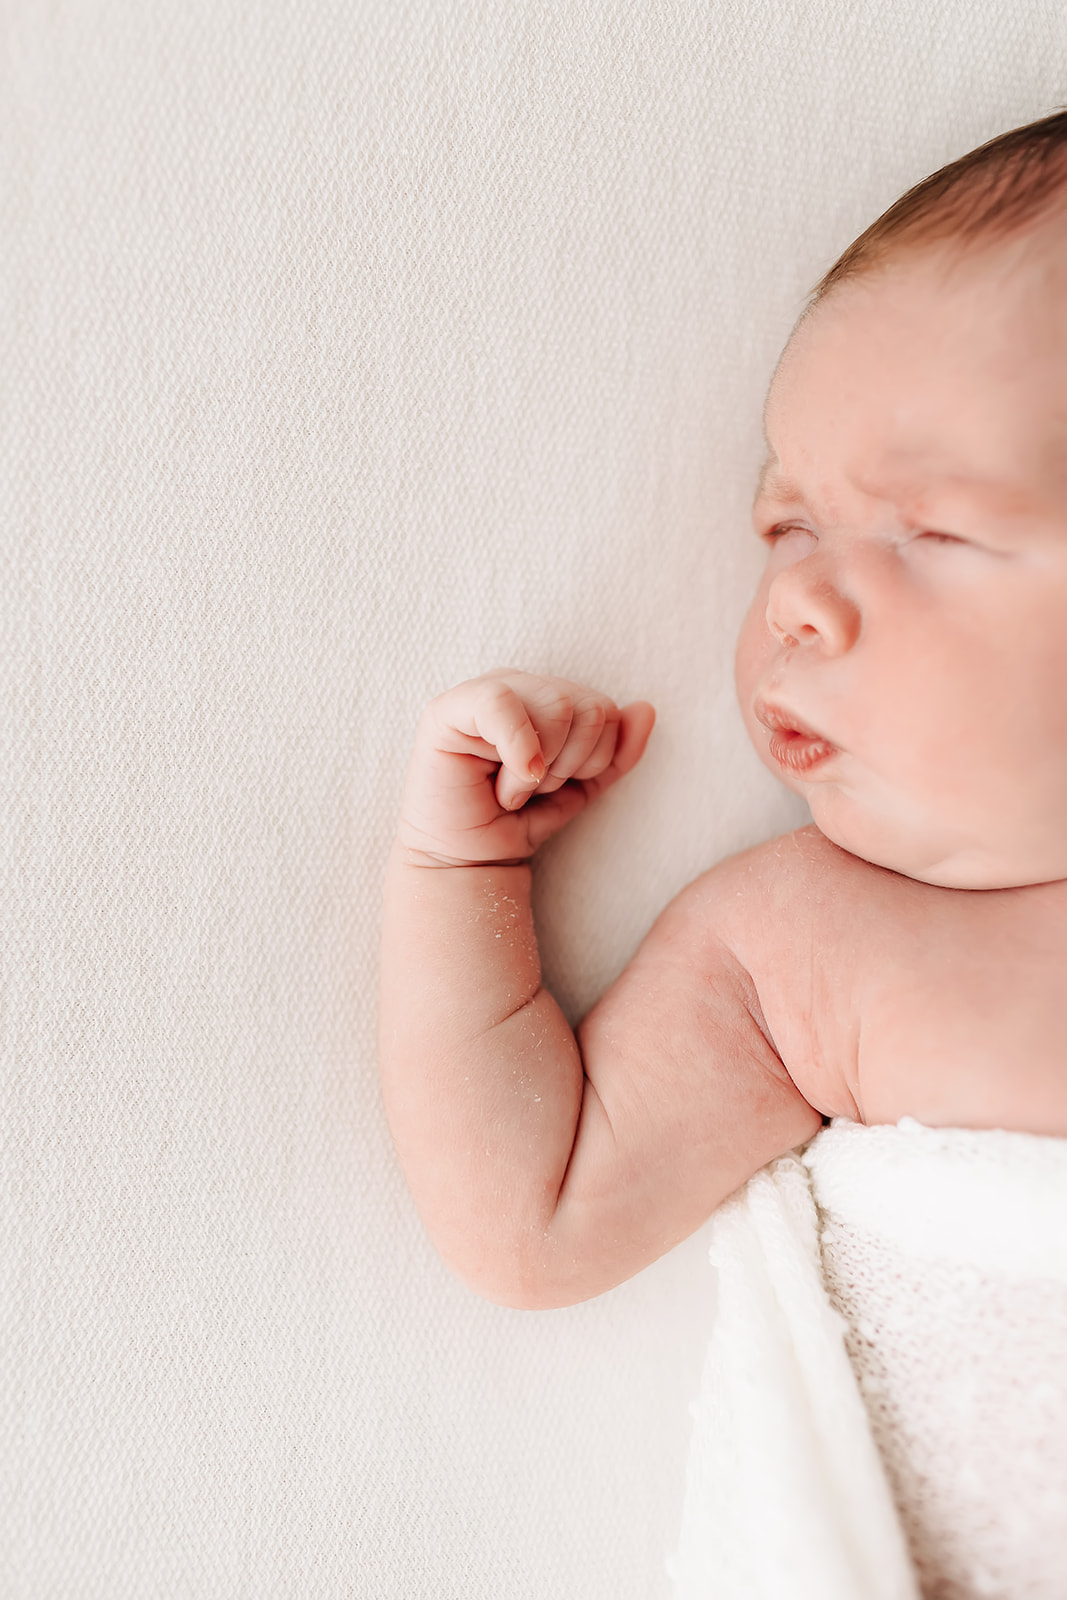 newborn baby sleeps on a bed with arm up like flexing muscles cotton babies saint louis